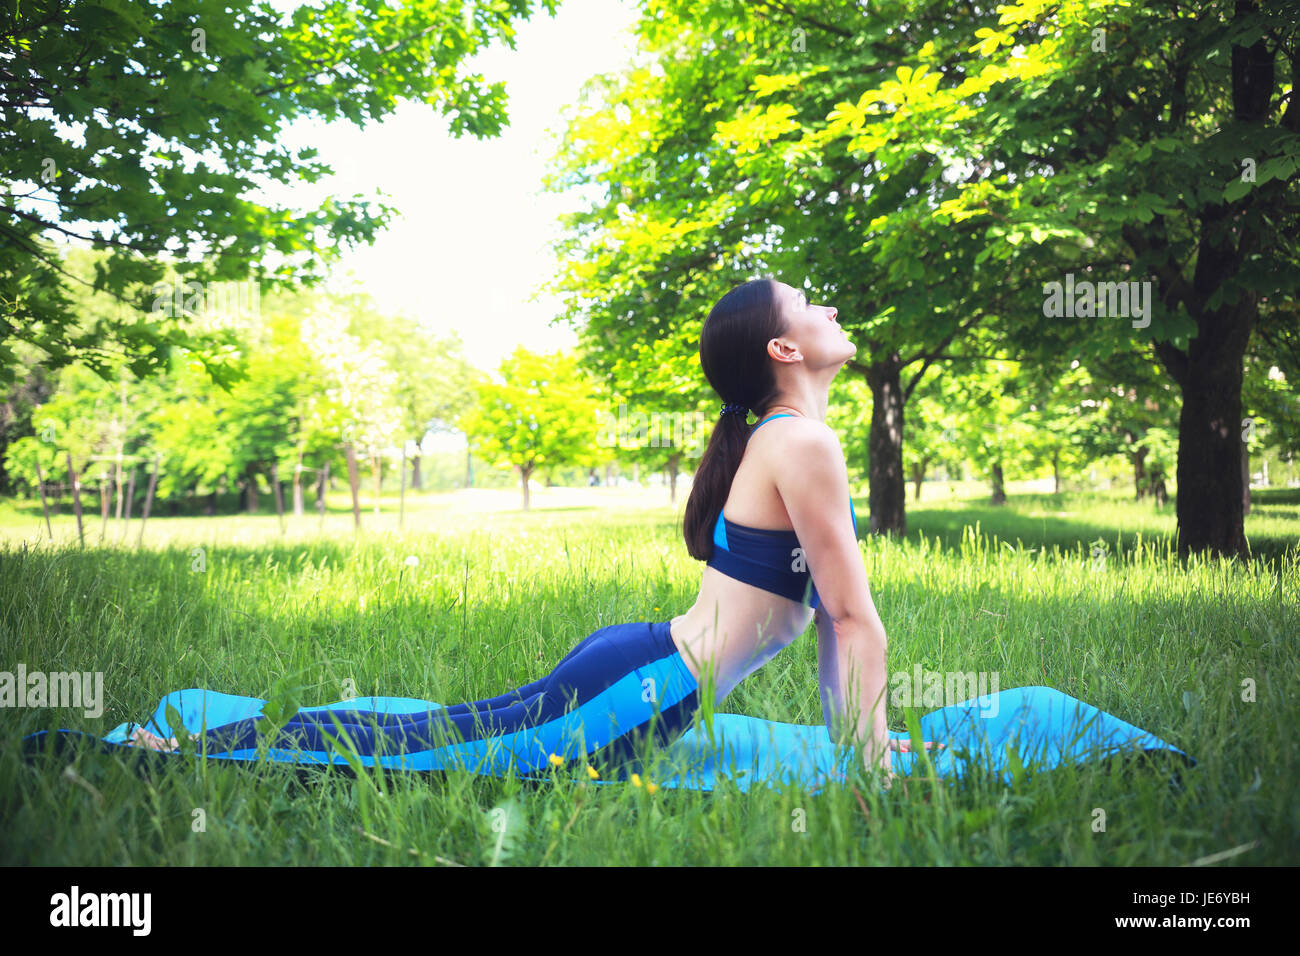 Young girl does stretching outdoors. Workout summer scene. Healthy lifestyle background. Stock Photo